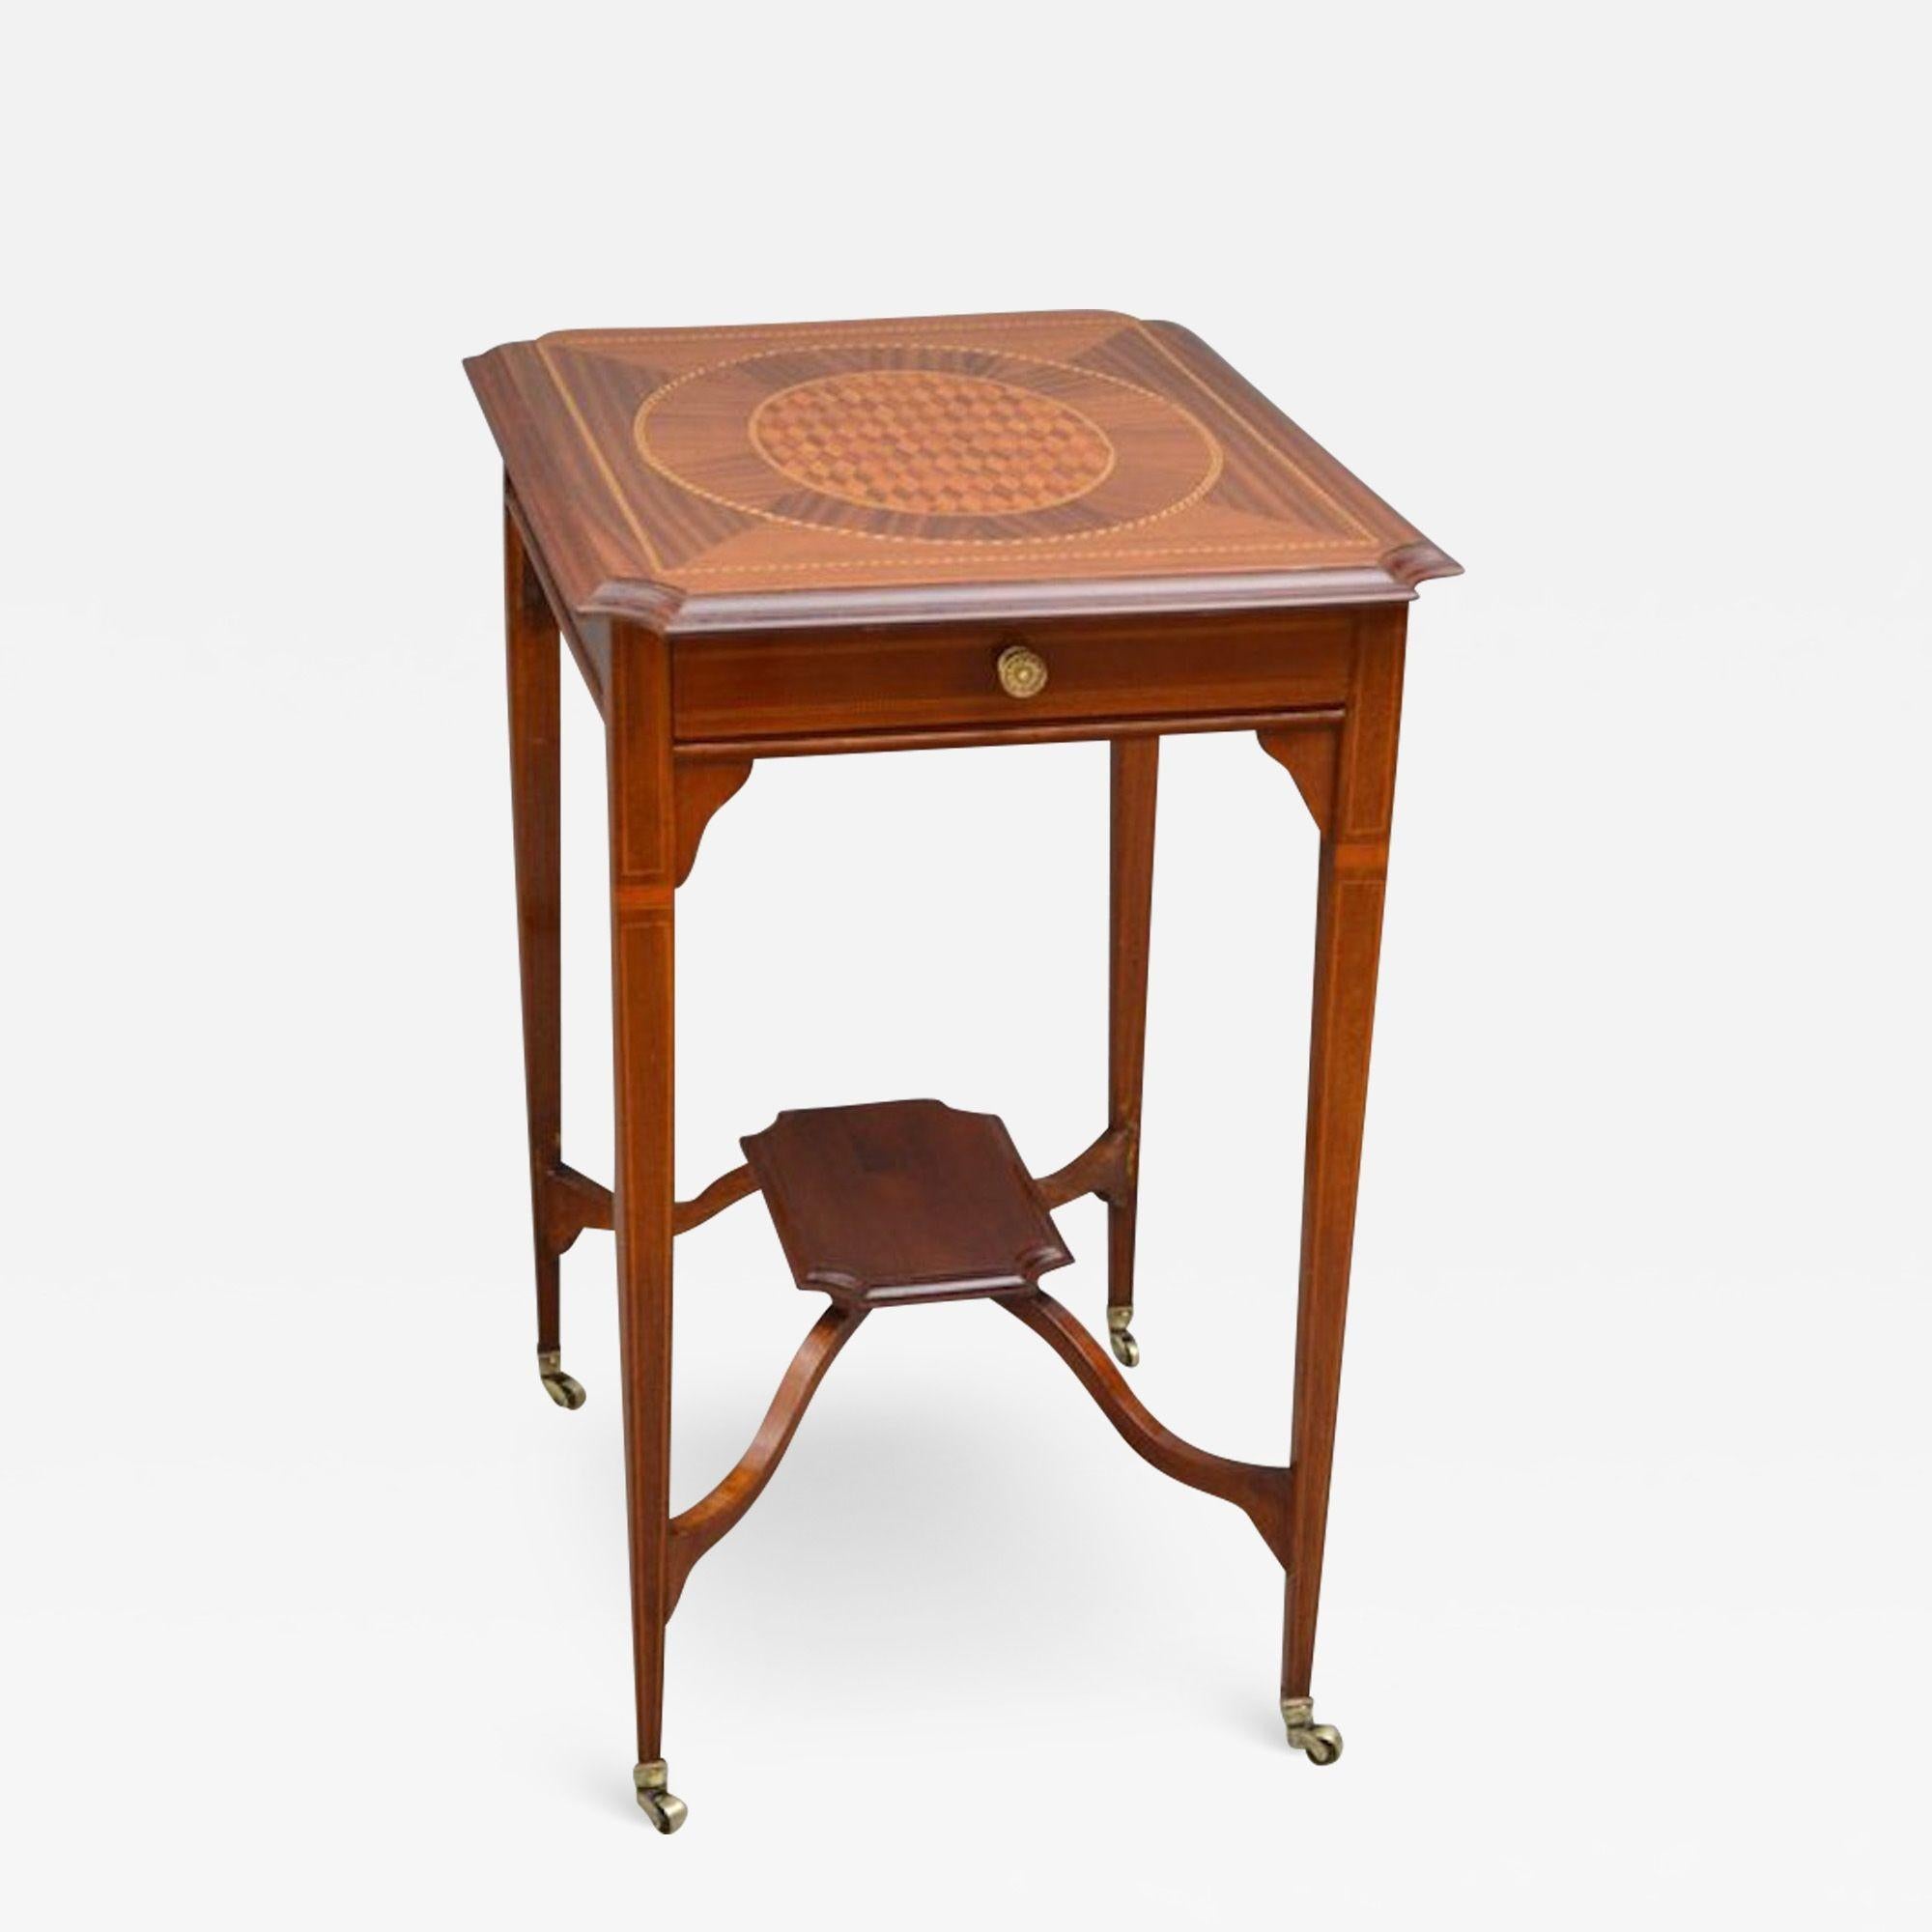 Sn3893 A very attractive Edwardian, mahogany table, having shaped top with geometrically inlaid top, practical frieze drawer and string inlaid legs united by undertier, all in wonderful condition throughout, ready to place at home. c1910
H28.5